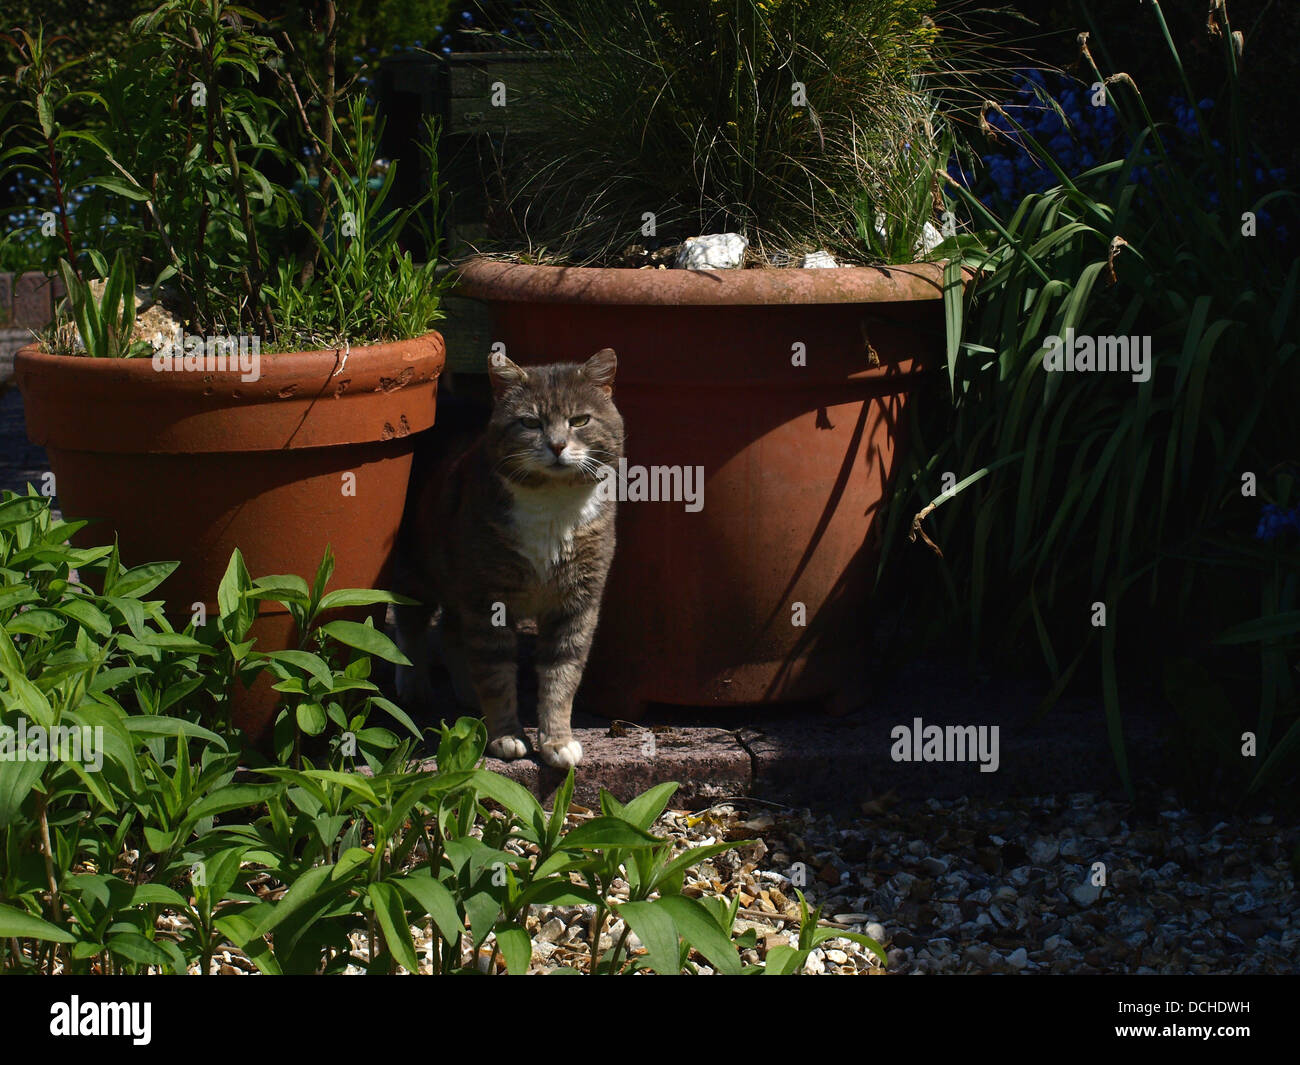 Grey cat in garden with plant pots Stock Photo